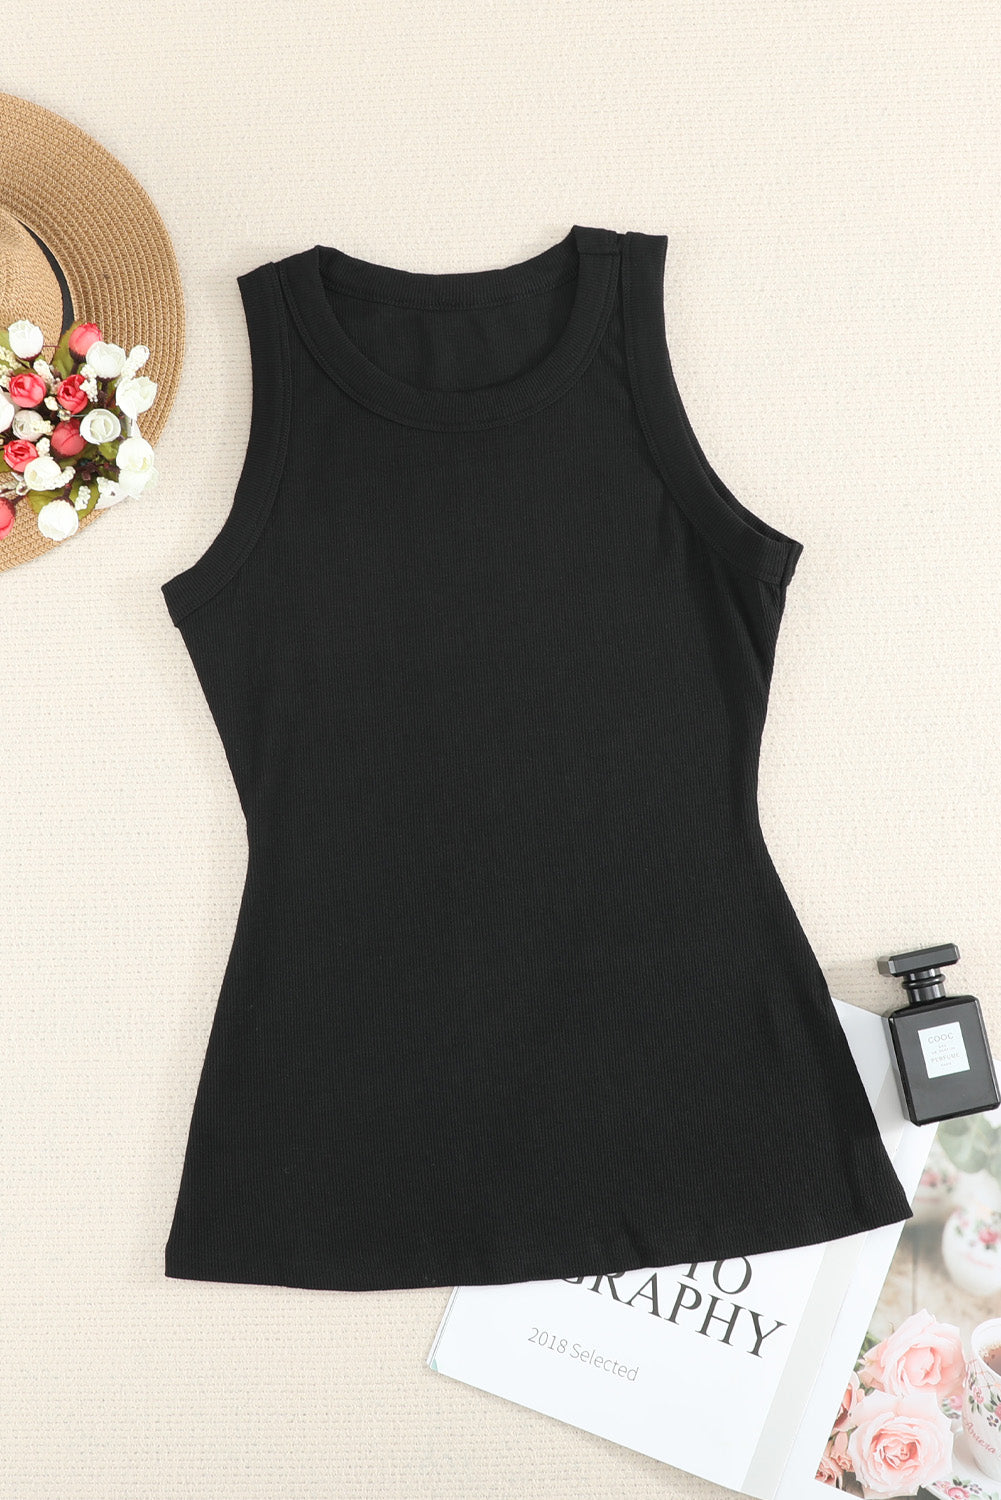 Solid Black Round Neck Ribbed Tank Top - SELFTRITSS